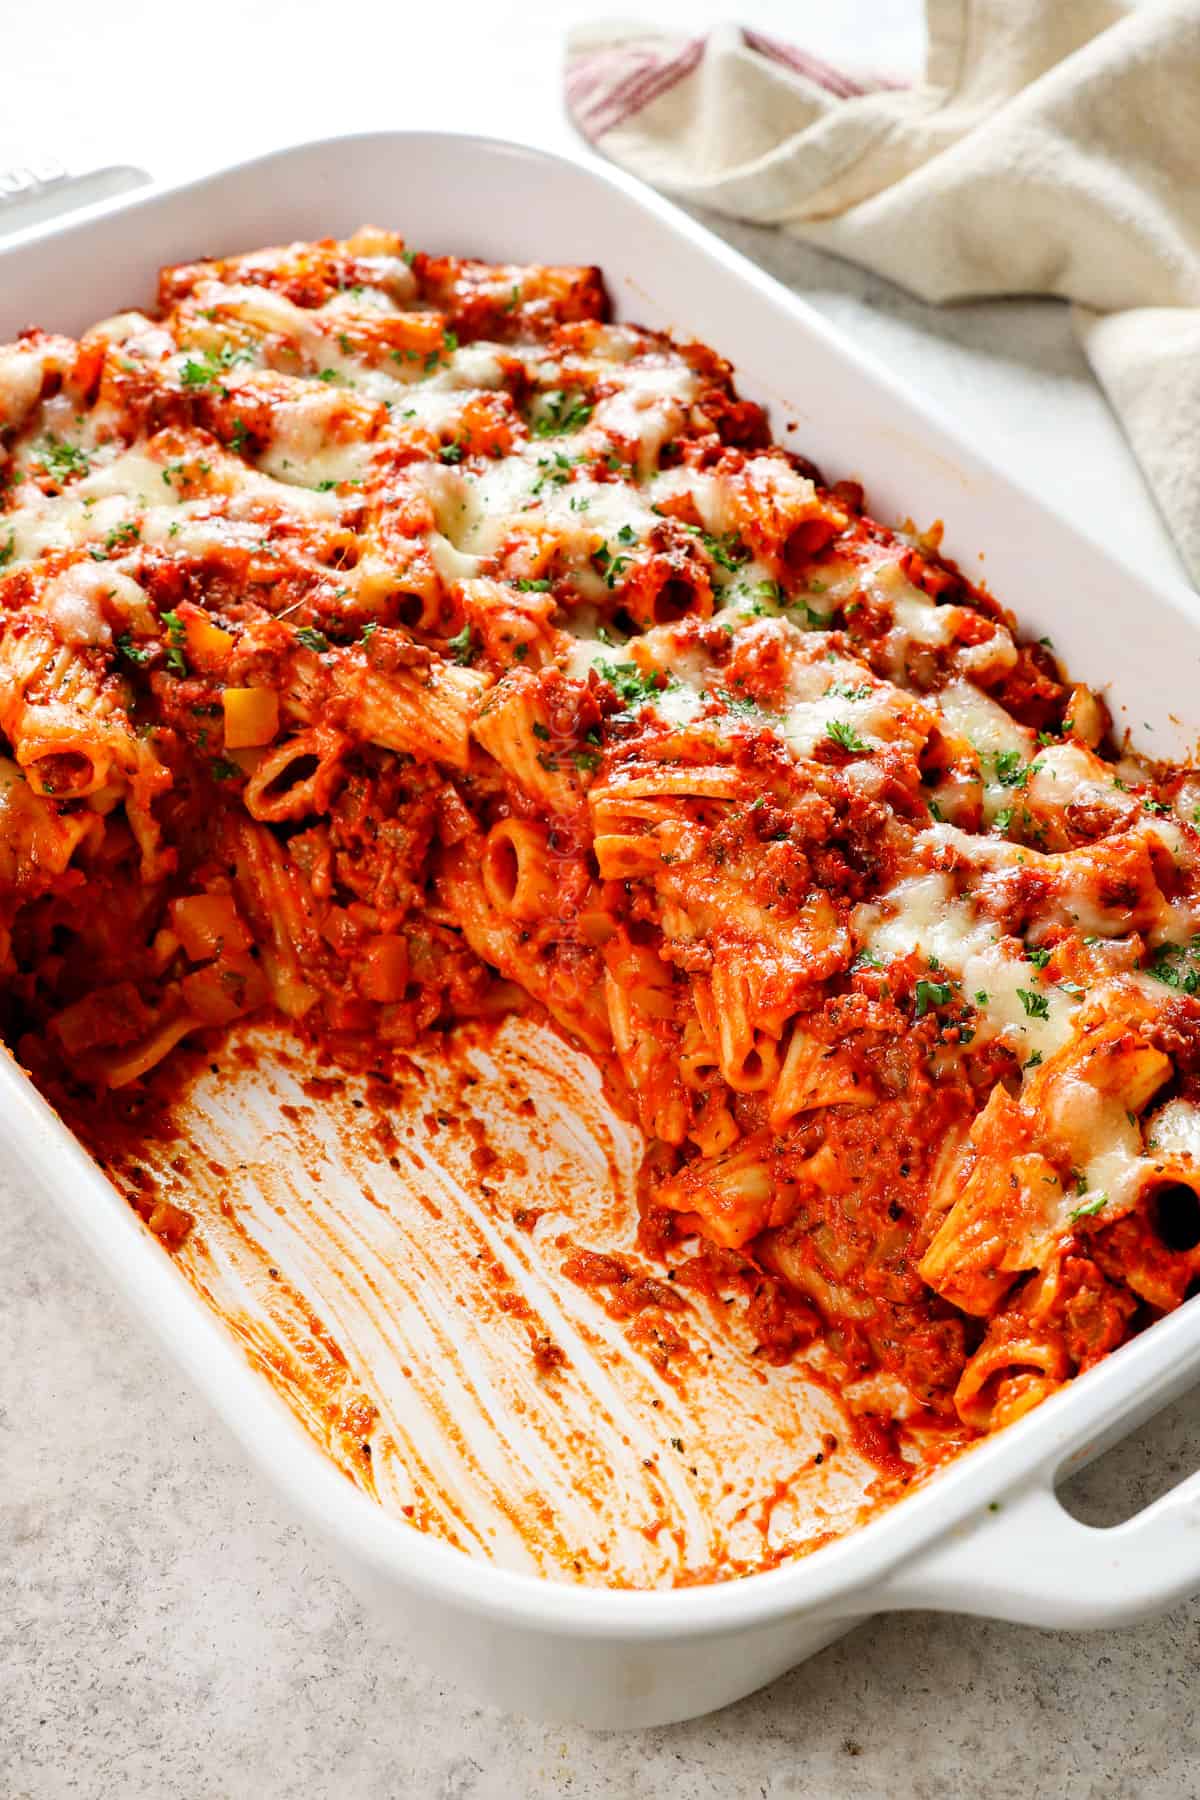 easy baked rigatoni recipe (rigatoni al forno) with portions removed from the casserole dish, showing the stack of rigatoni, sausage, and cheese